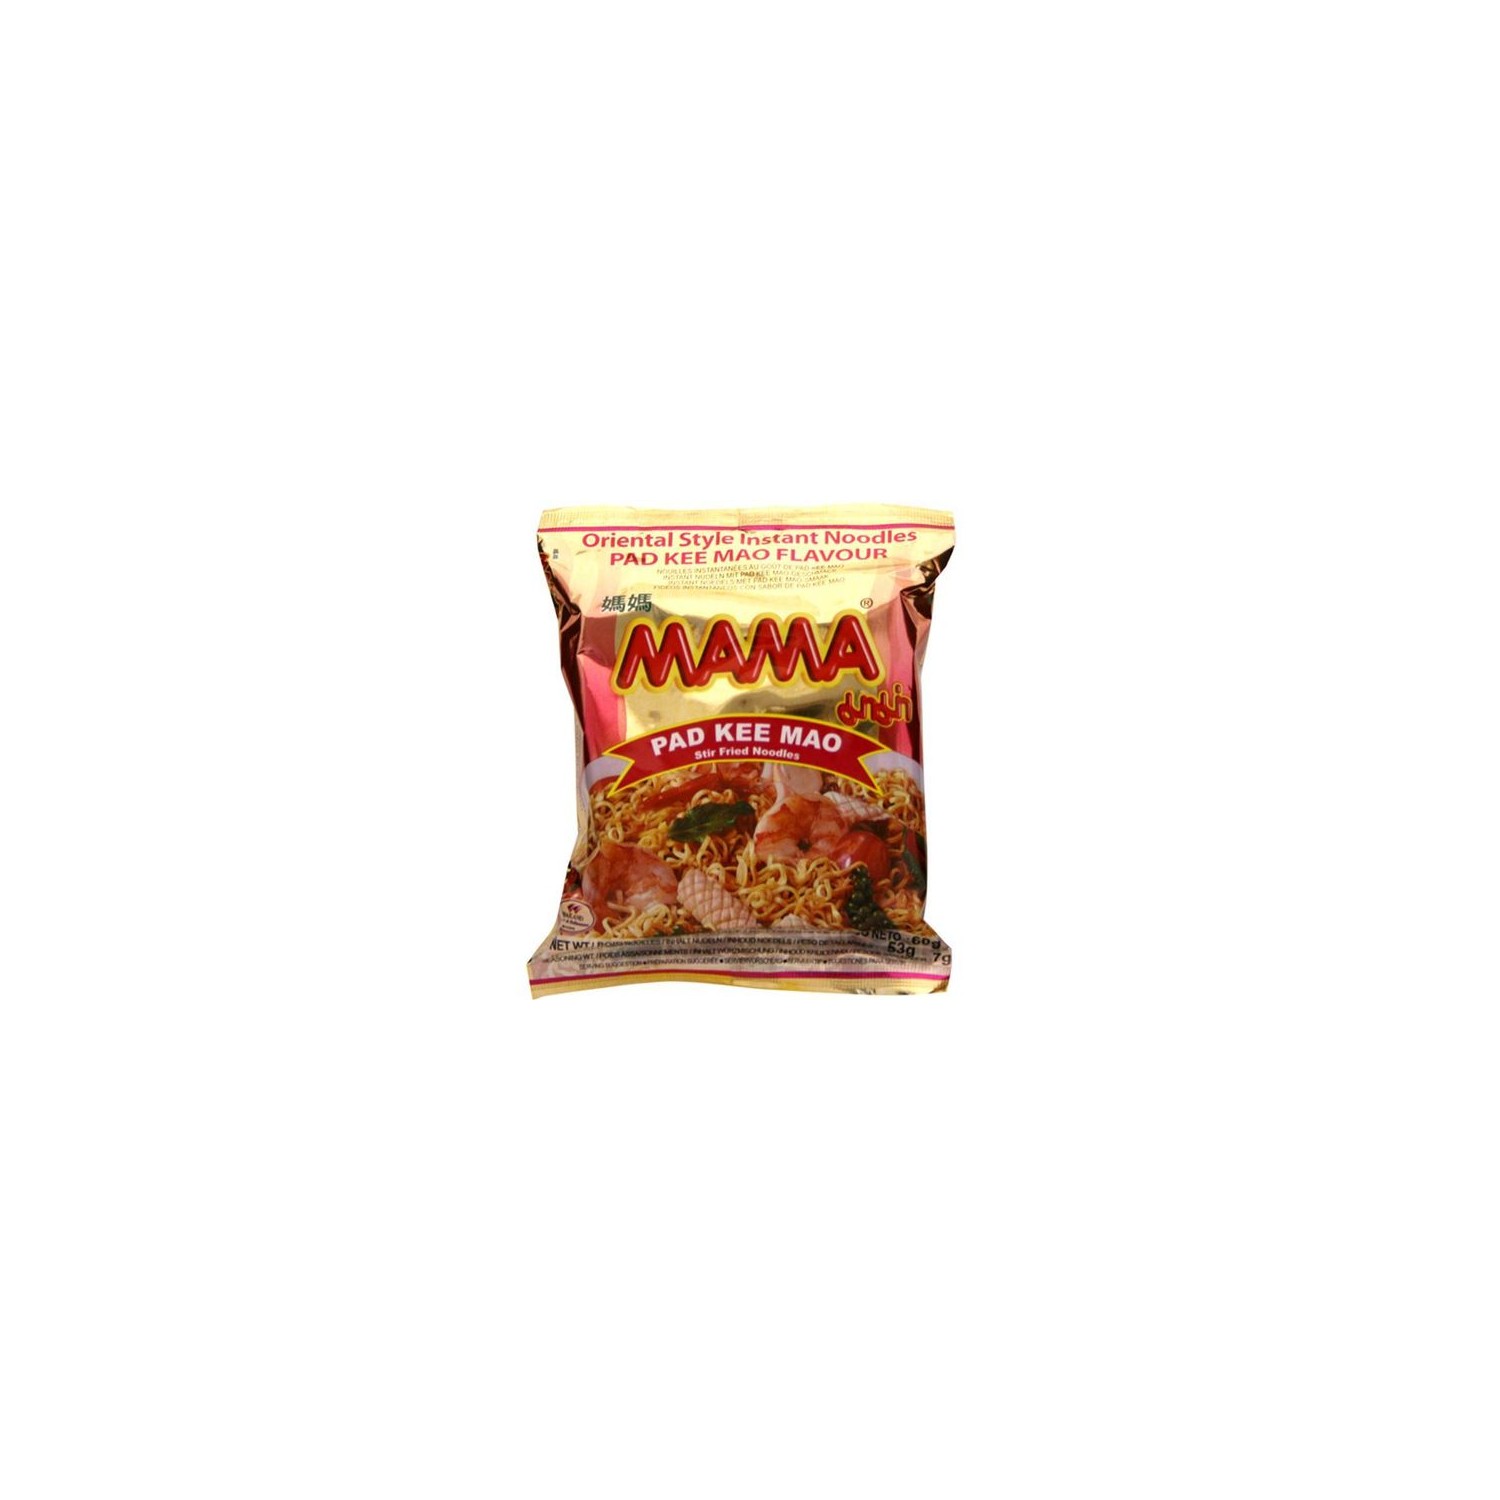 Mama Pad Kee Mao Noodles 60g Pad Kee Mao Instant Thai Yellow Stir Fried Noodles